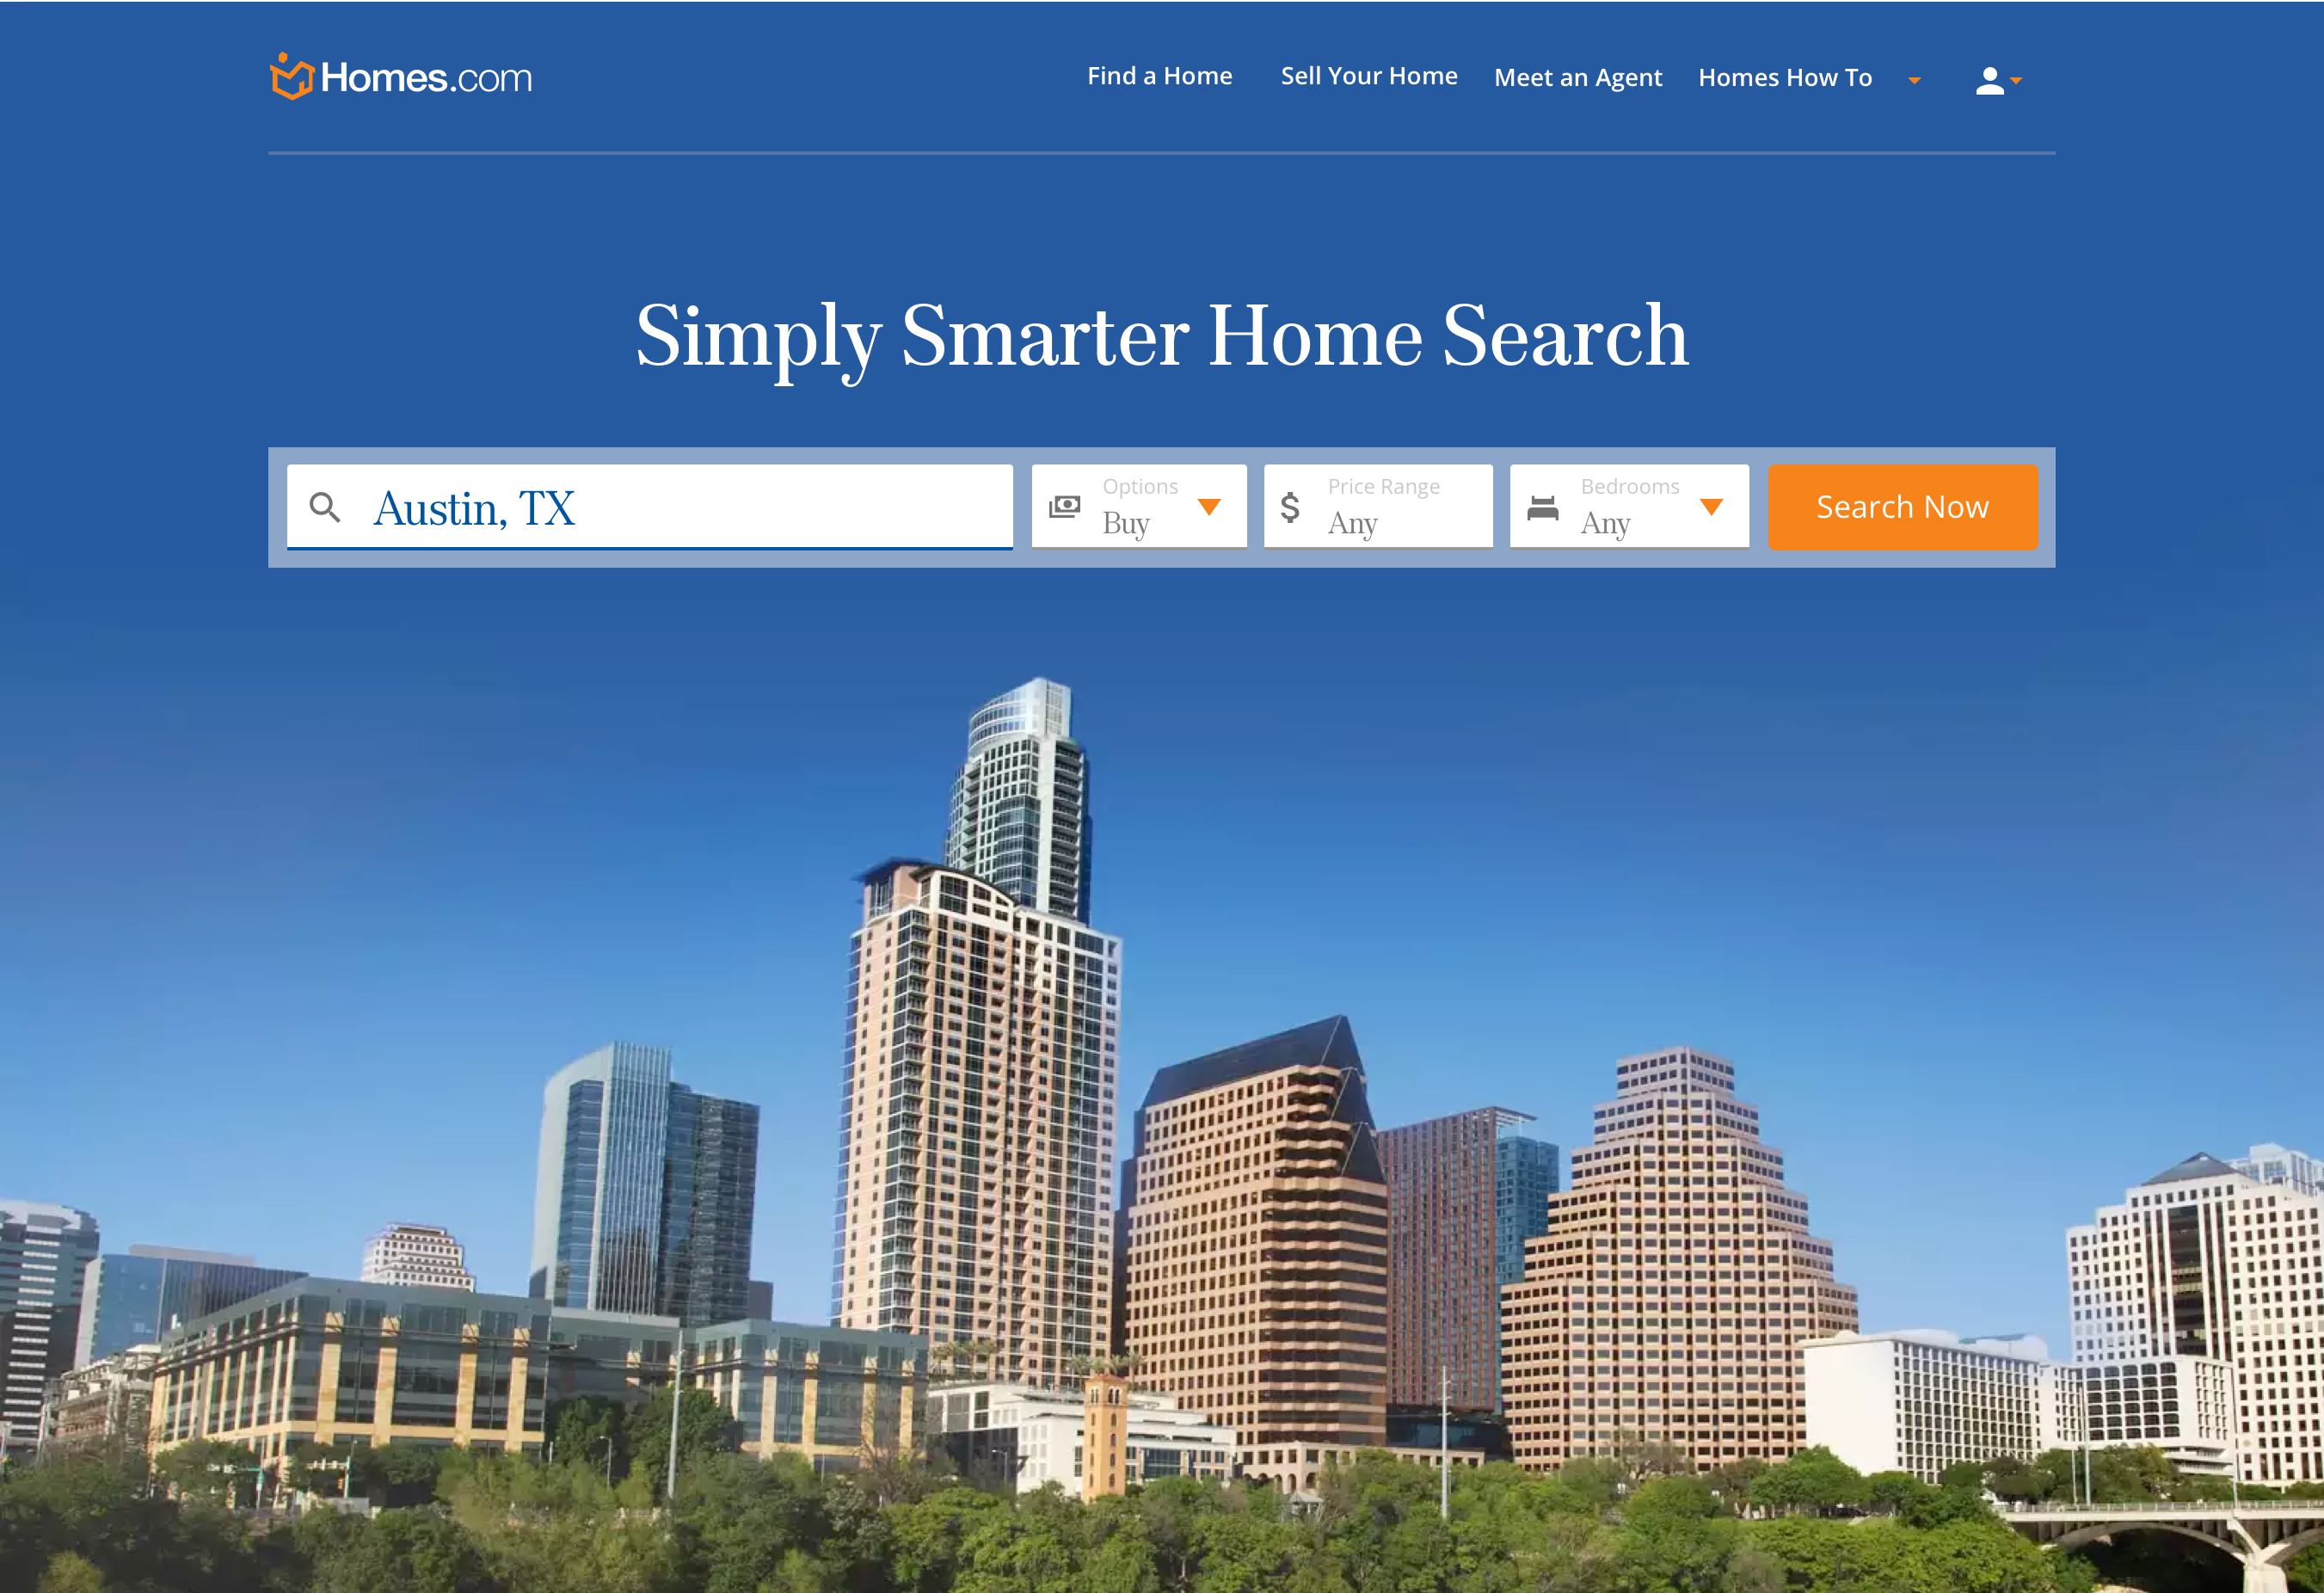 The new Homes.com site challenges the "sea of sameness" in home search.